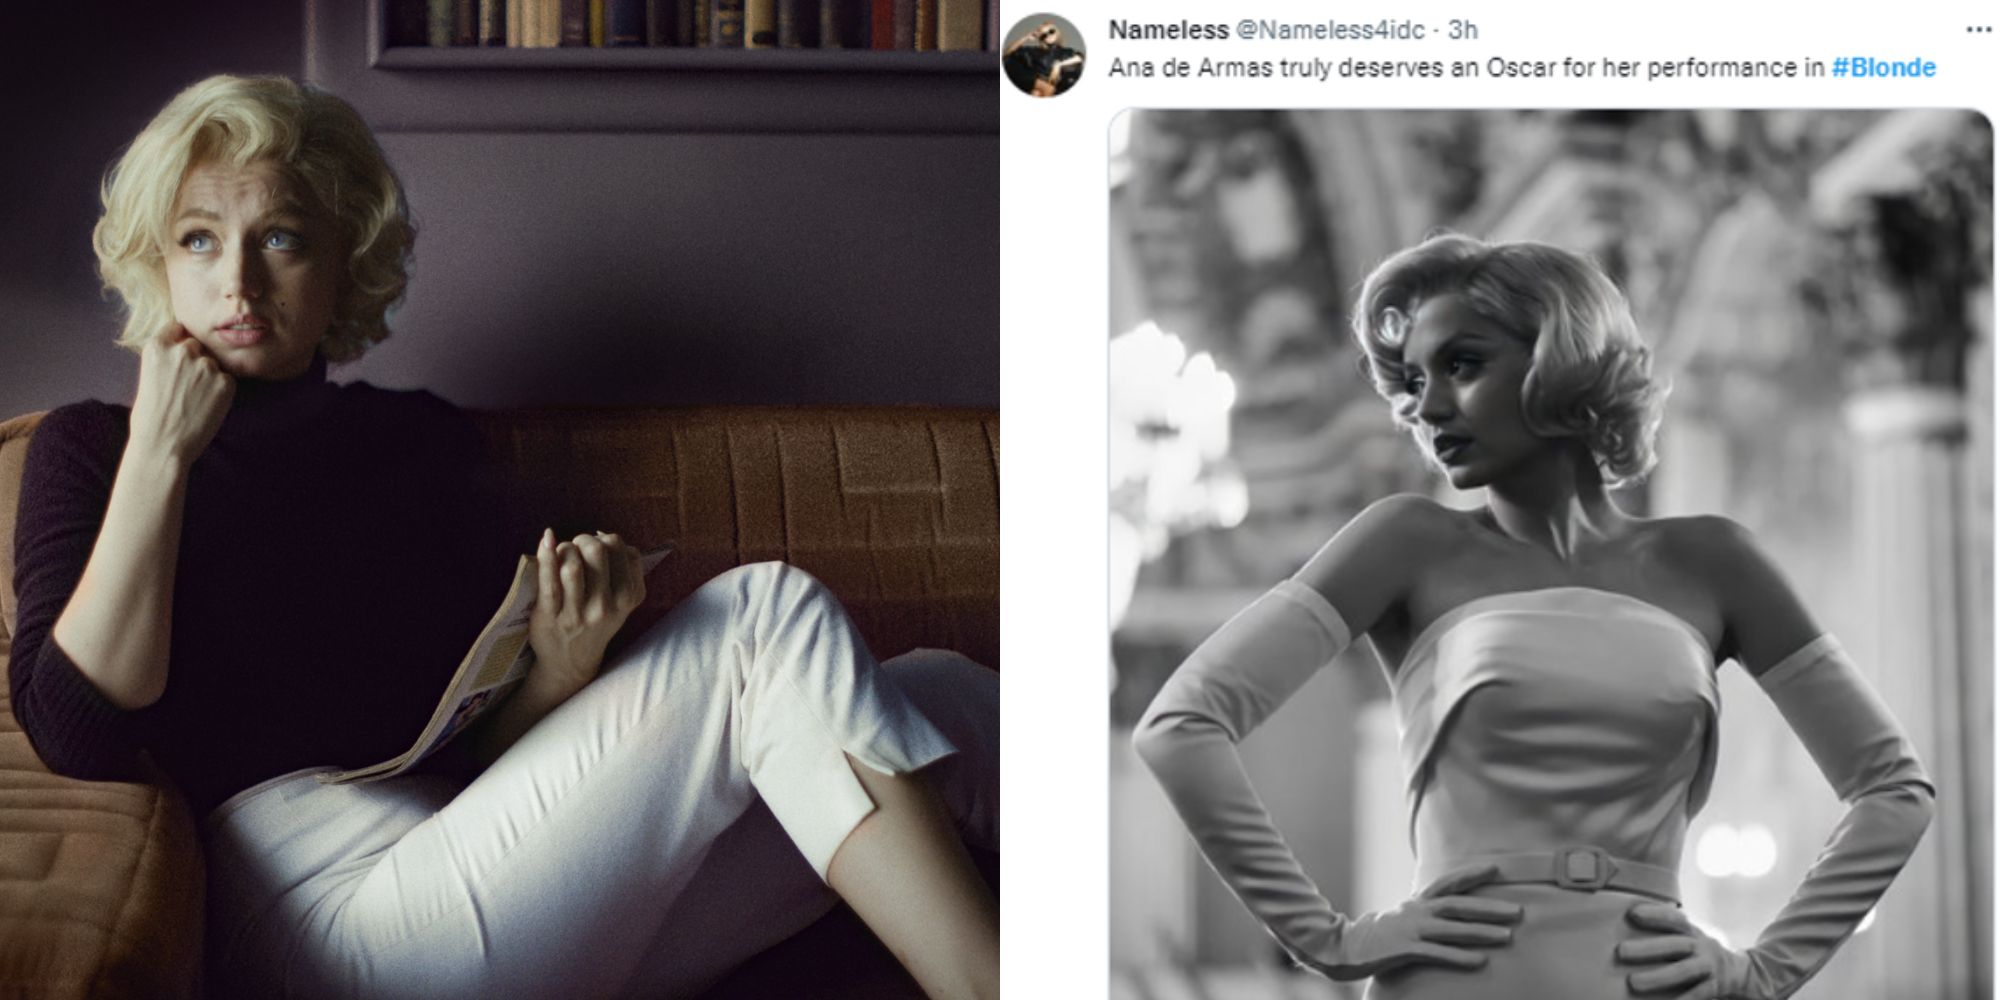 Split image showing Ana de Armas in Blonde and a Tweet about her performance in the film.